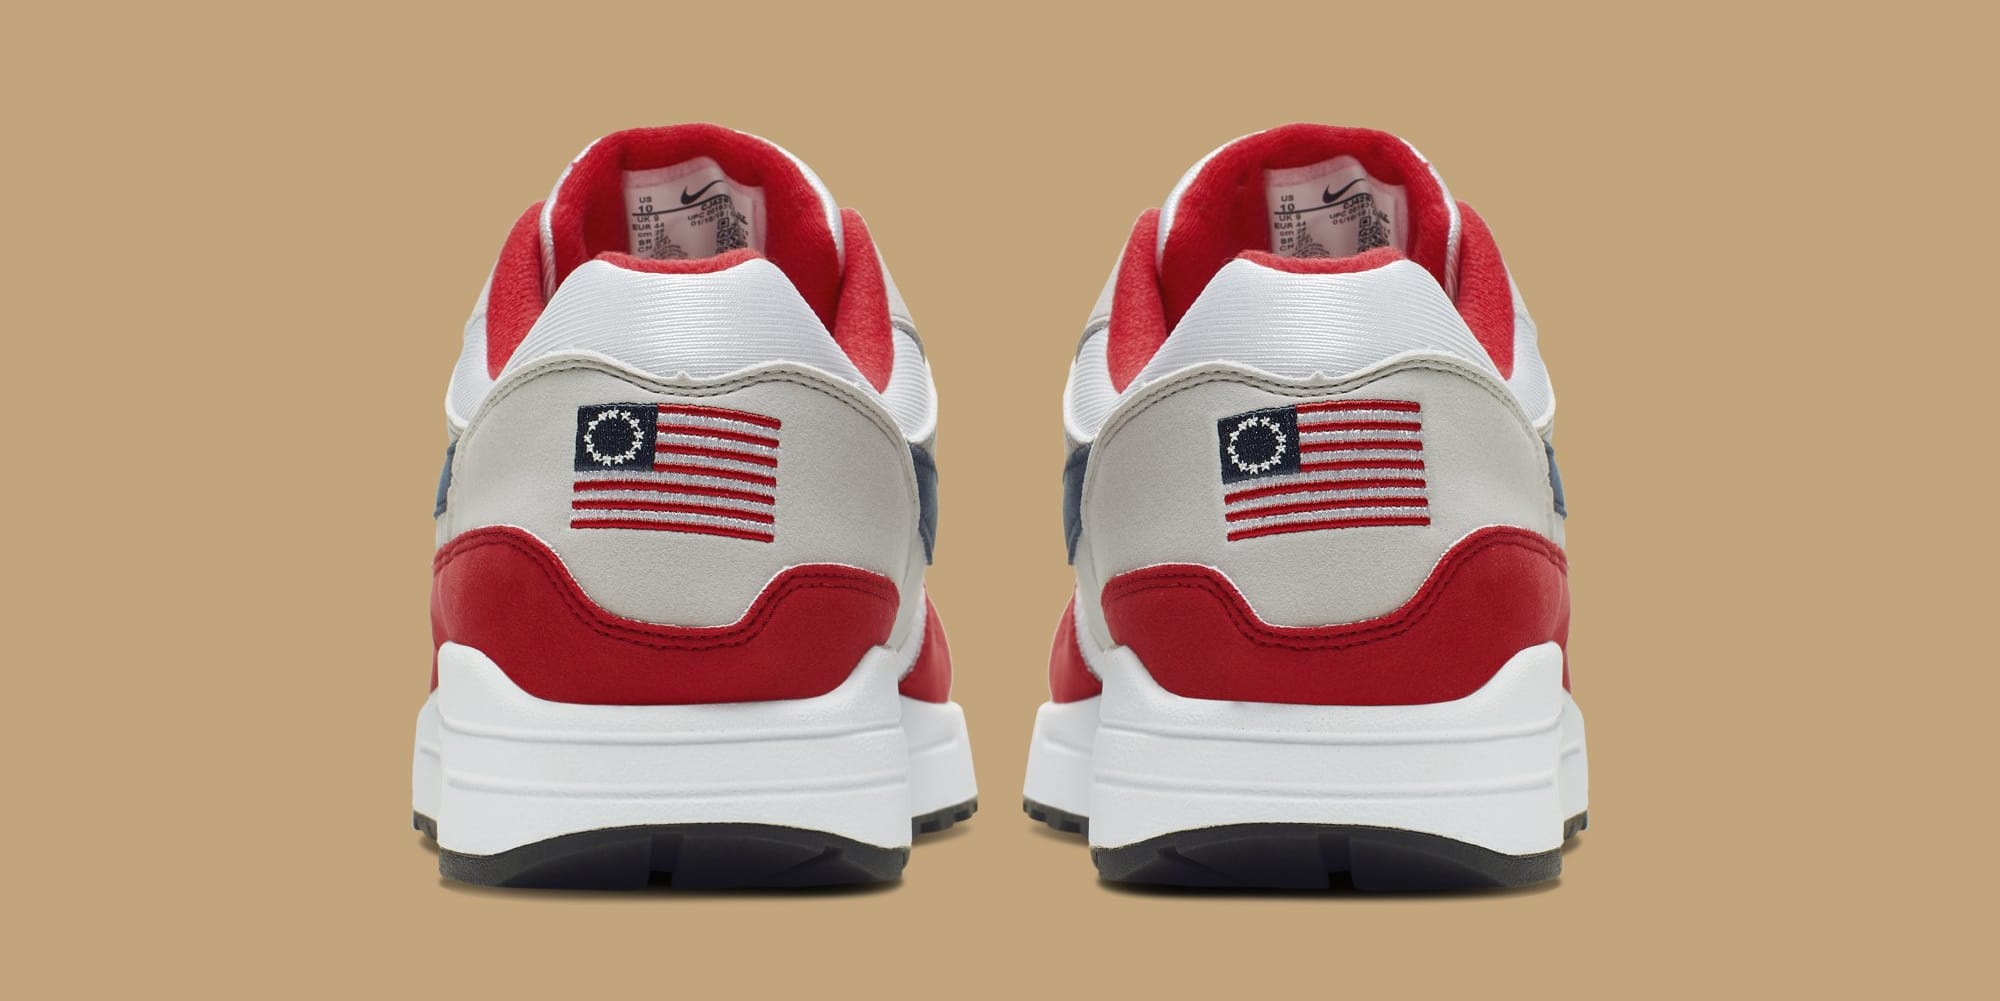 Nike CEO Mark Parker Divulges On Why They Pulled Betsy Ross Shoe